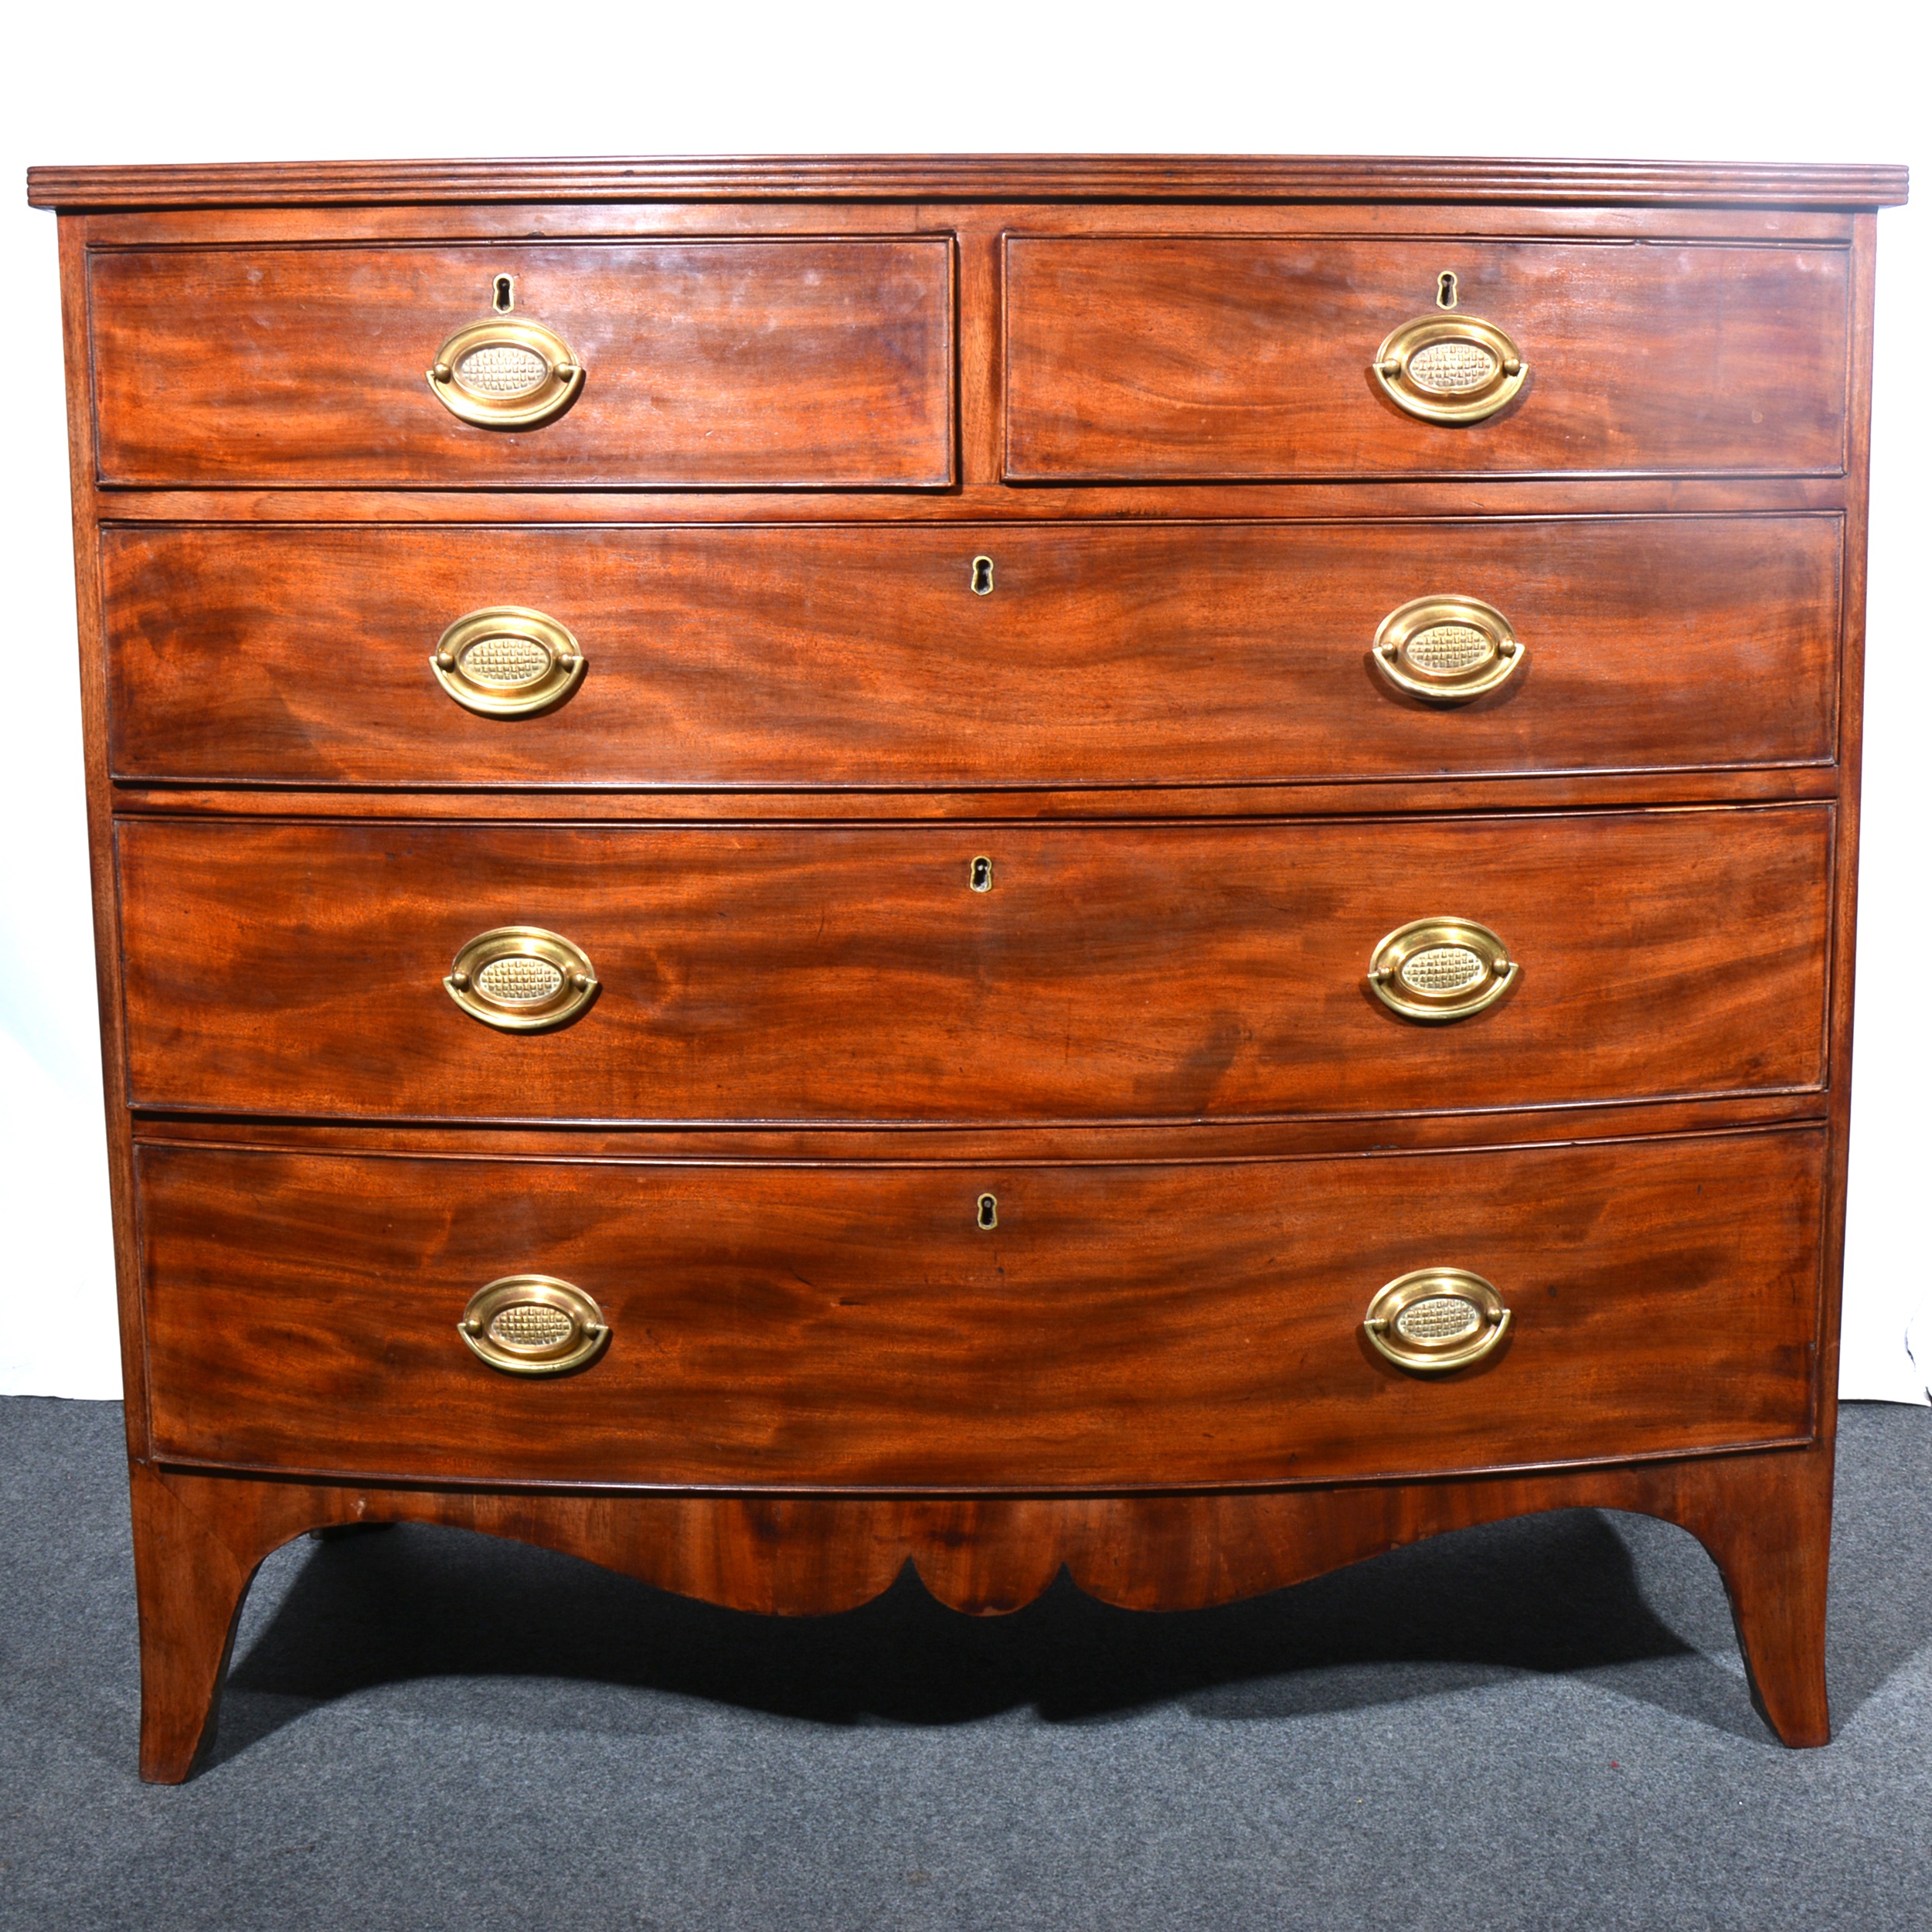 A Victorian mahogany bowfront chest of drawers.